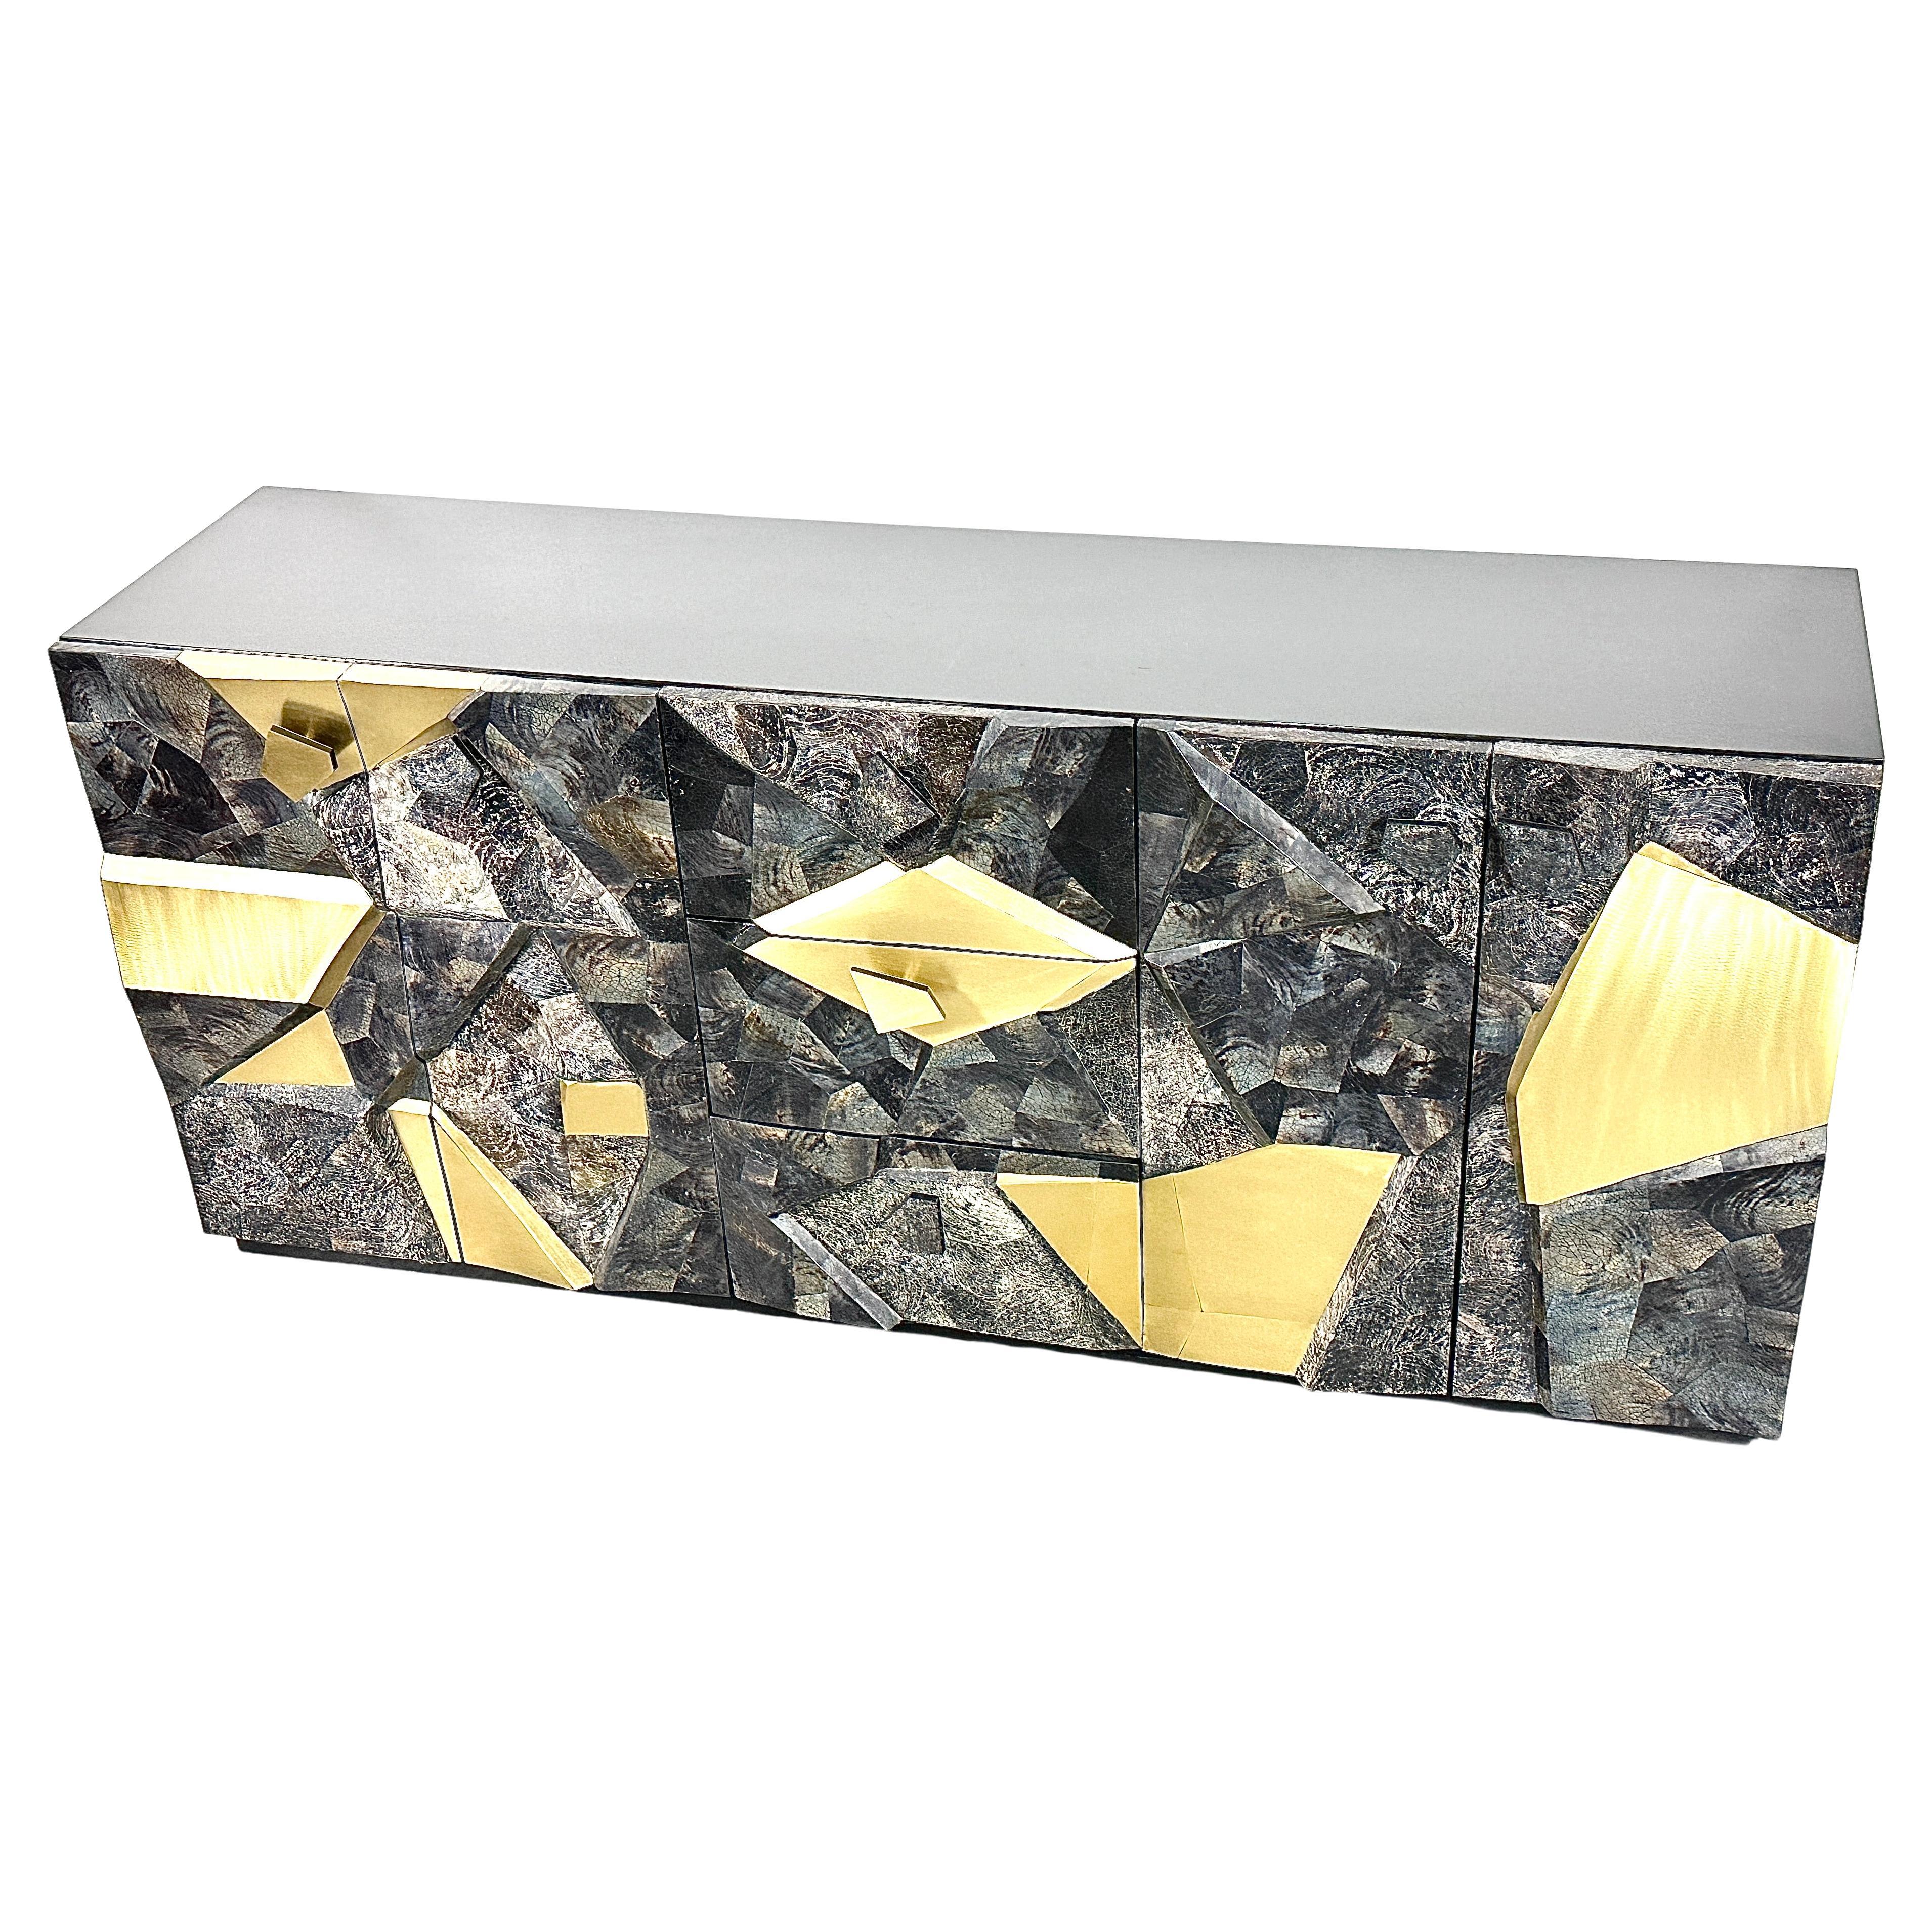 Brutalist Style Mosaic Stone and Brass Sculpture Front Relief Credenza Cabinet 